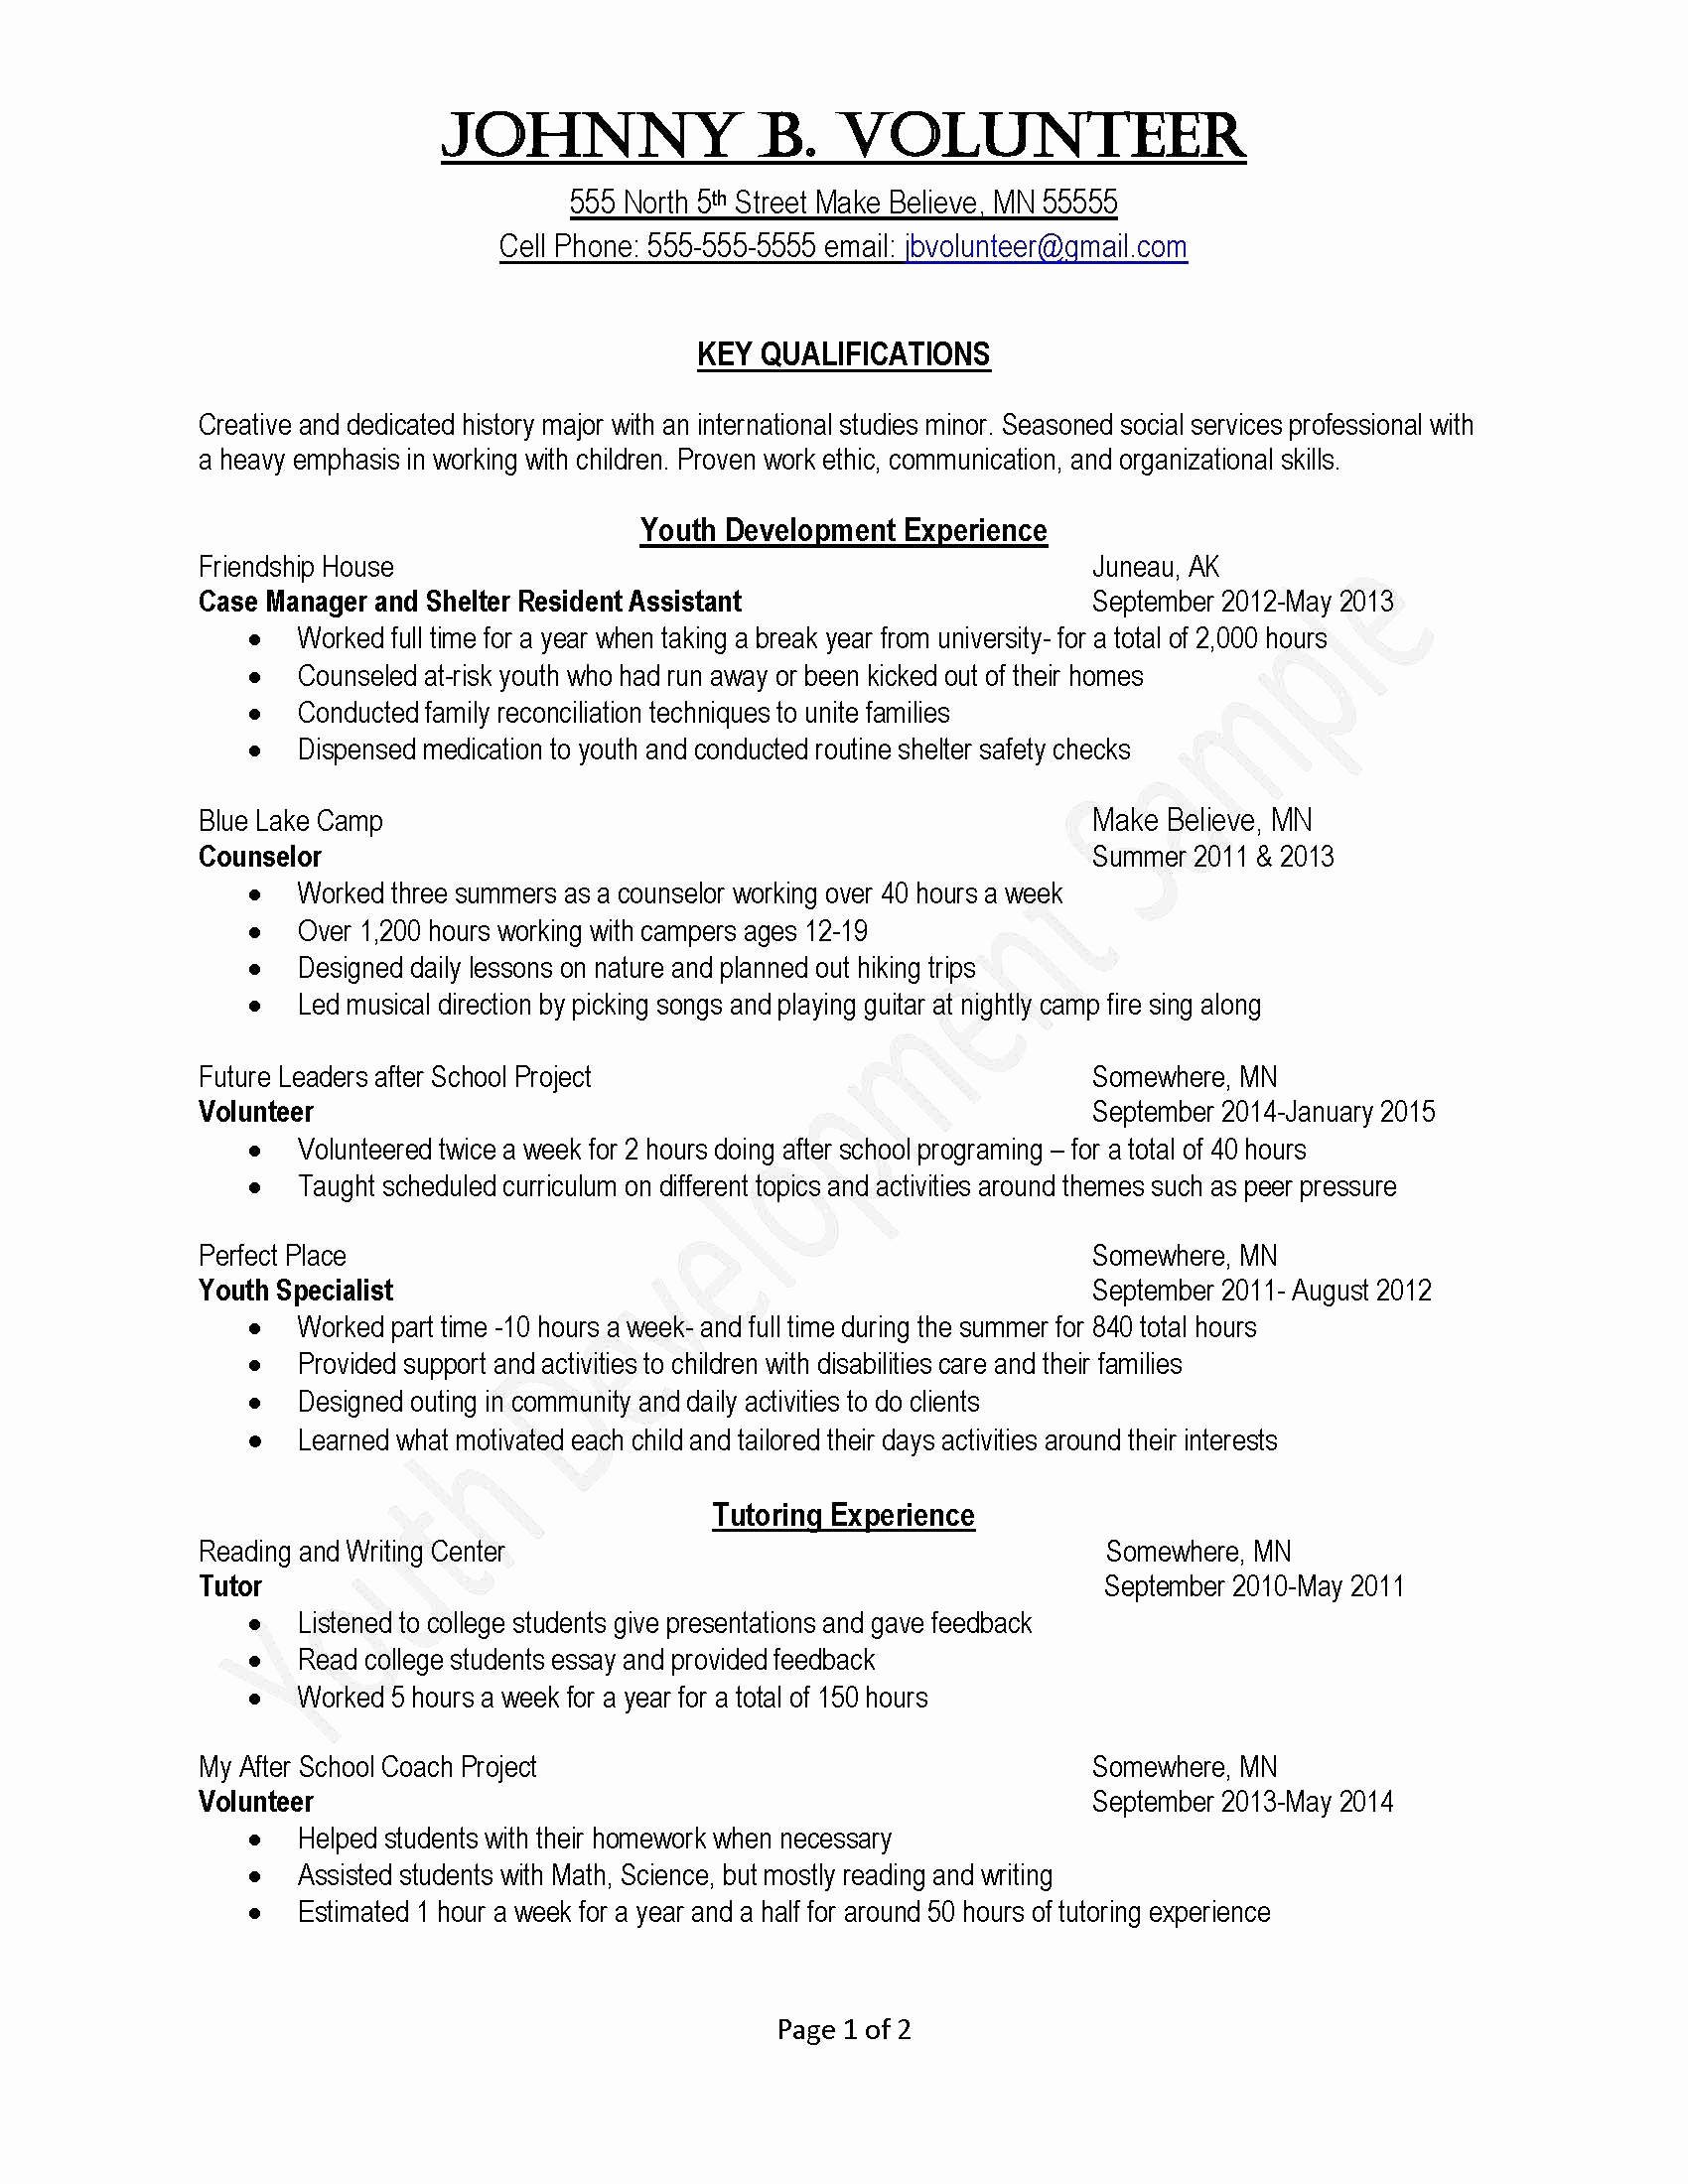 Paralegal Cover Letter Template - Paralegal Cover Letter Inspirational Od Consultant Cover Letter